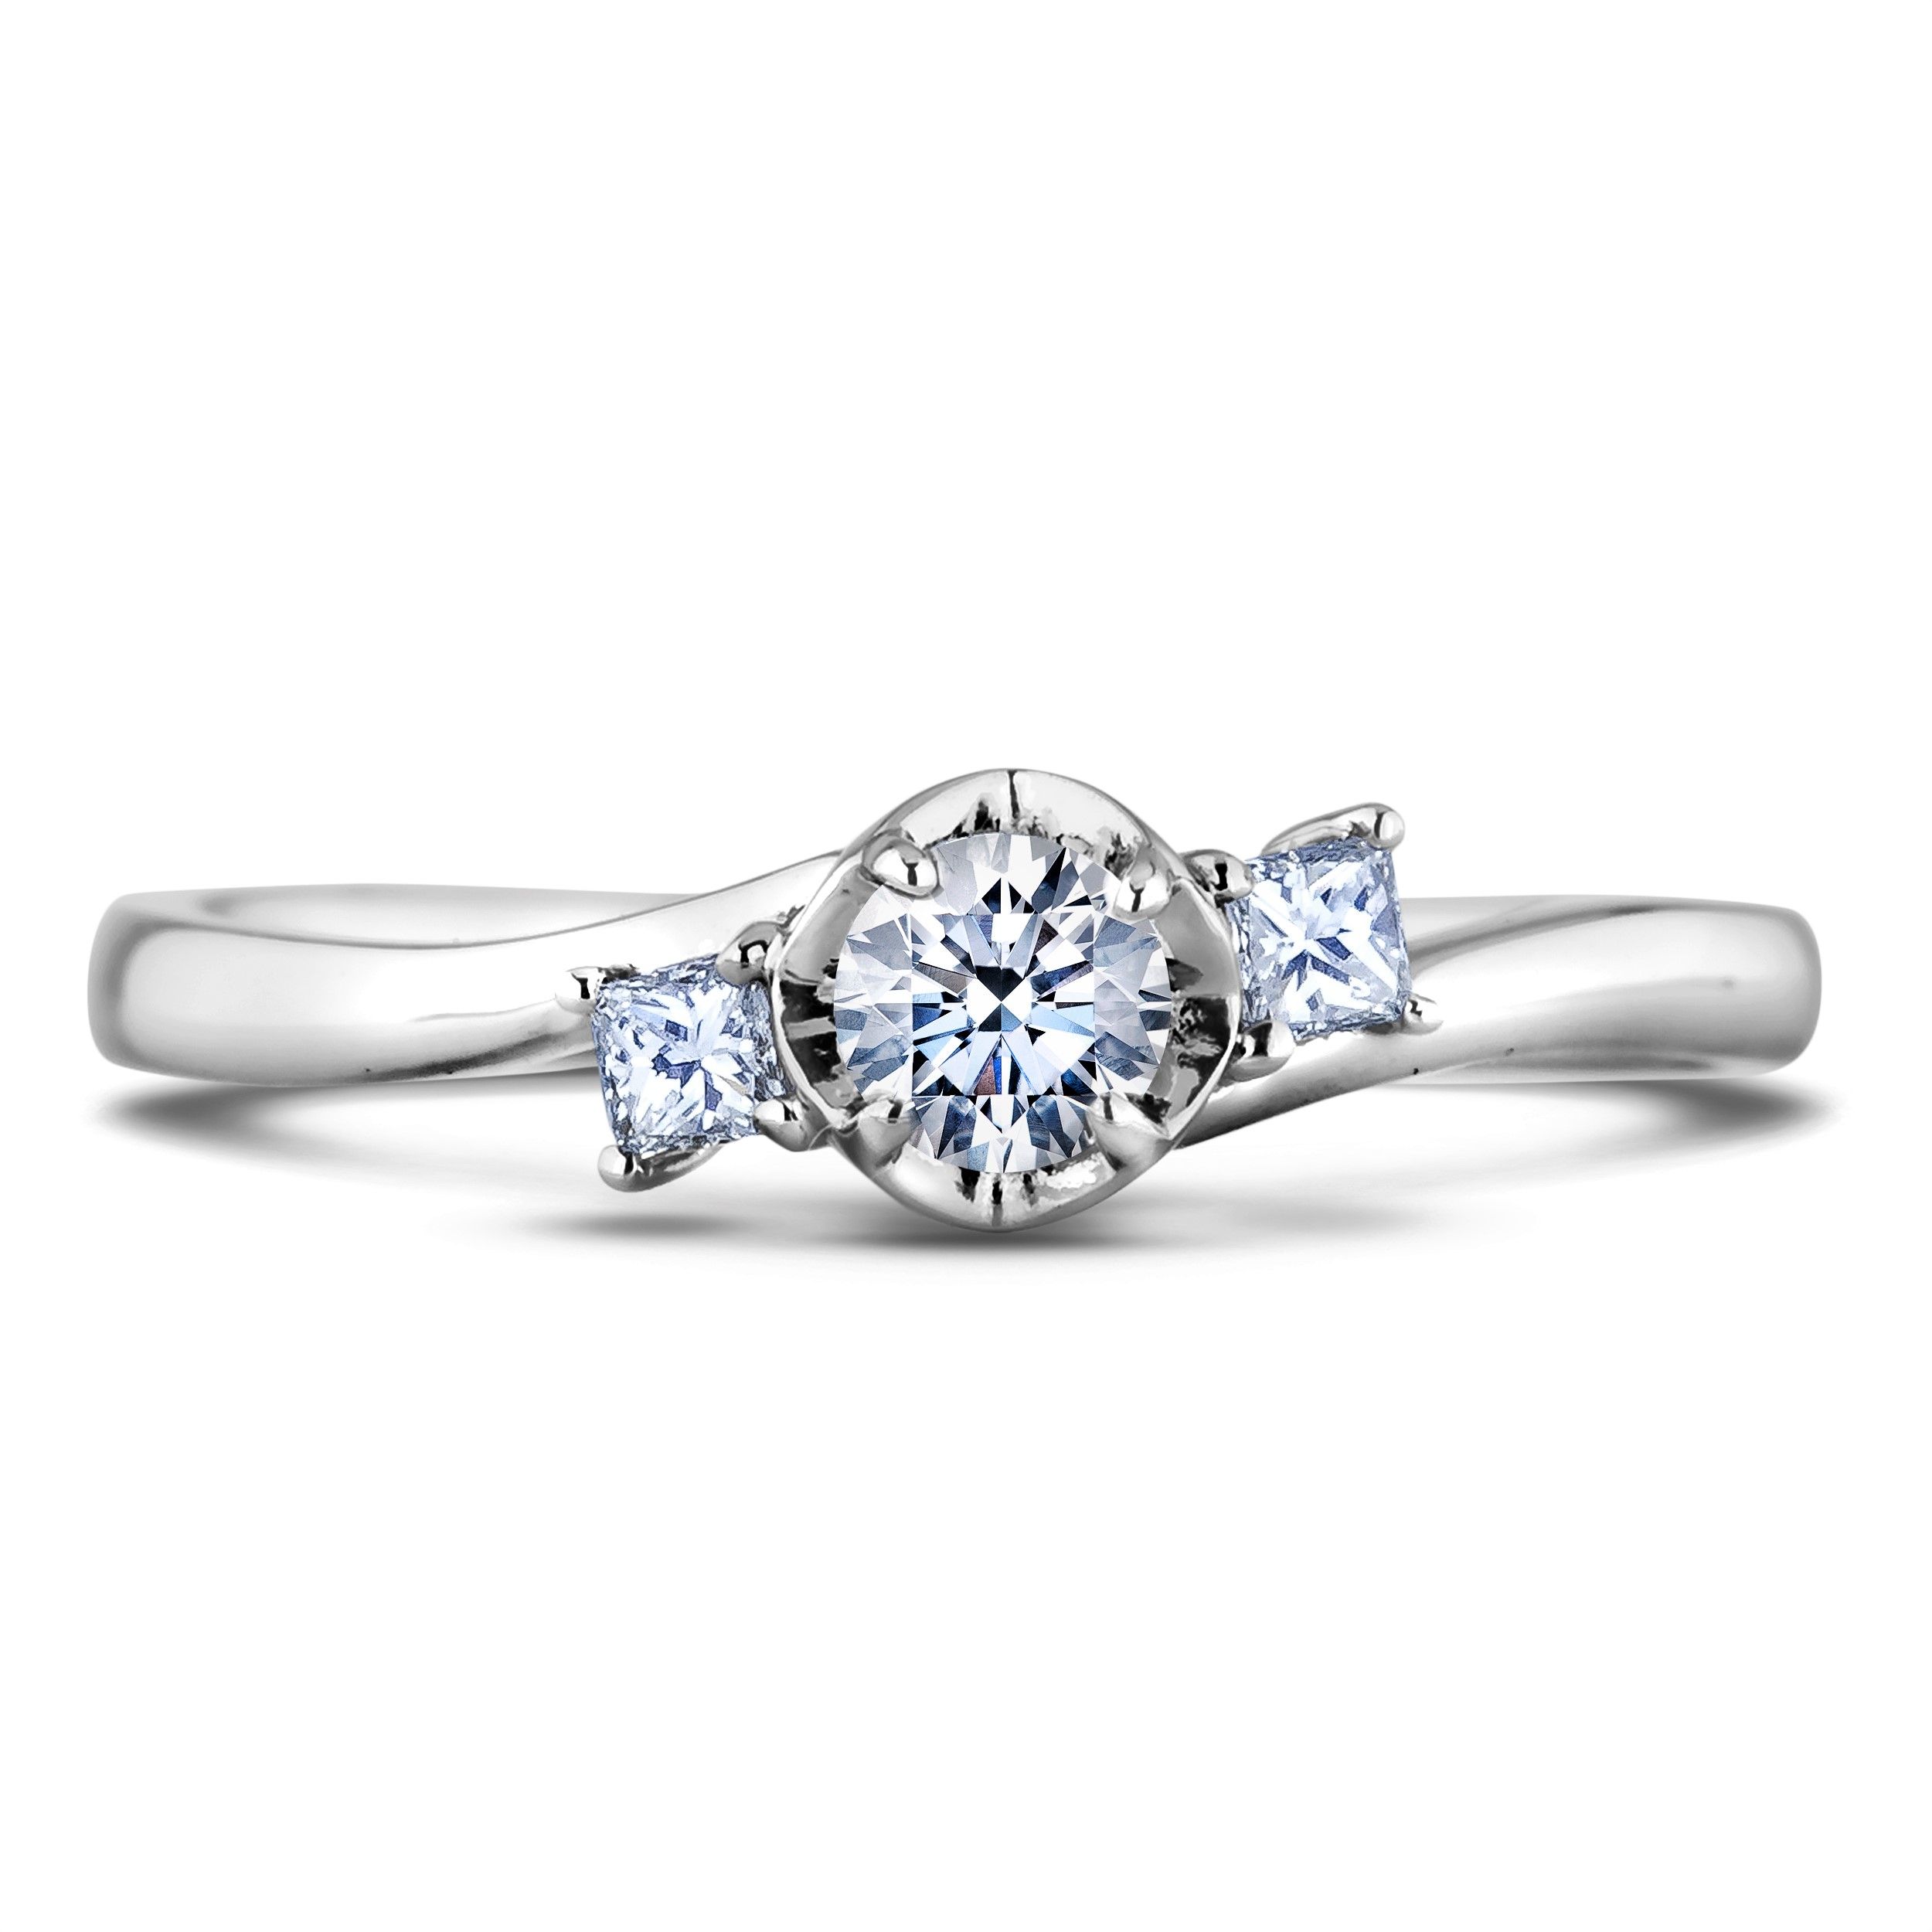 Canadian Diamond Trilogy Engagement Ring Intended For Best And Newest Diamond Swirl Anniversary Bands In White Gold (View 7 of 25)